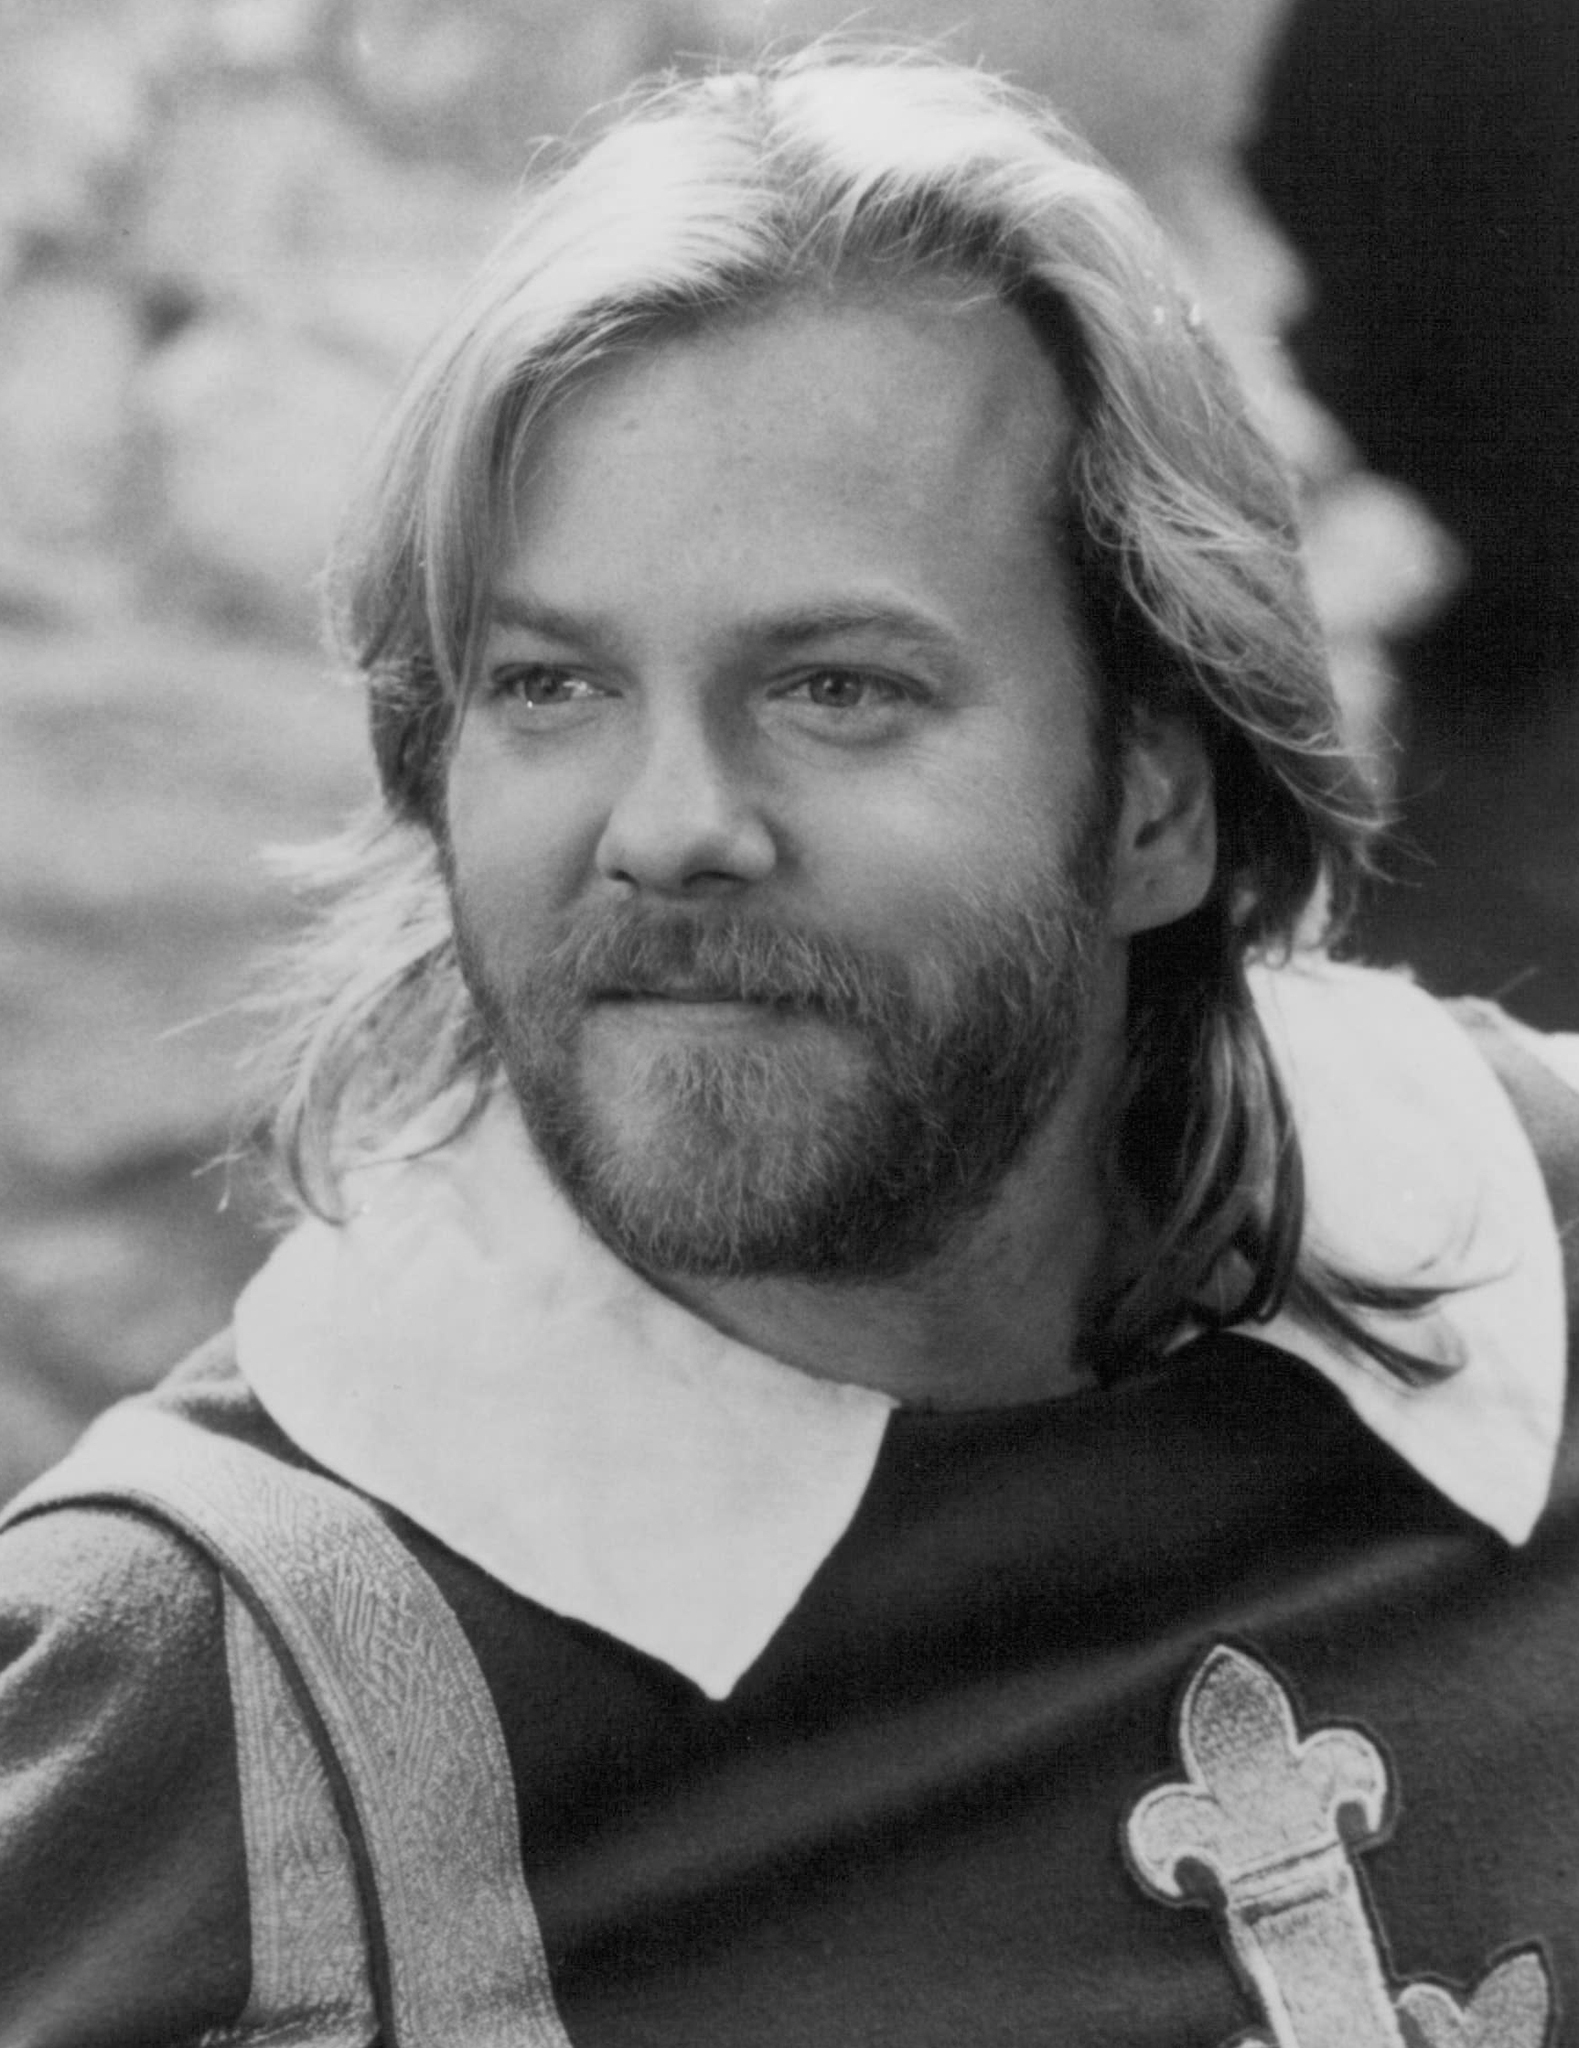 Still of Kiefer Sutherland in The Three Musketeers (1993)